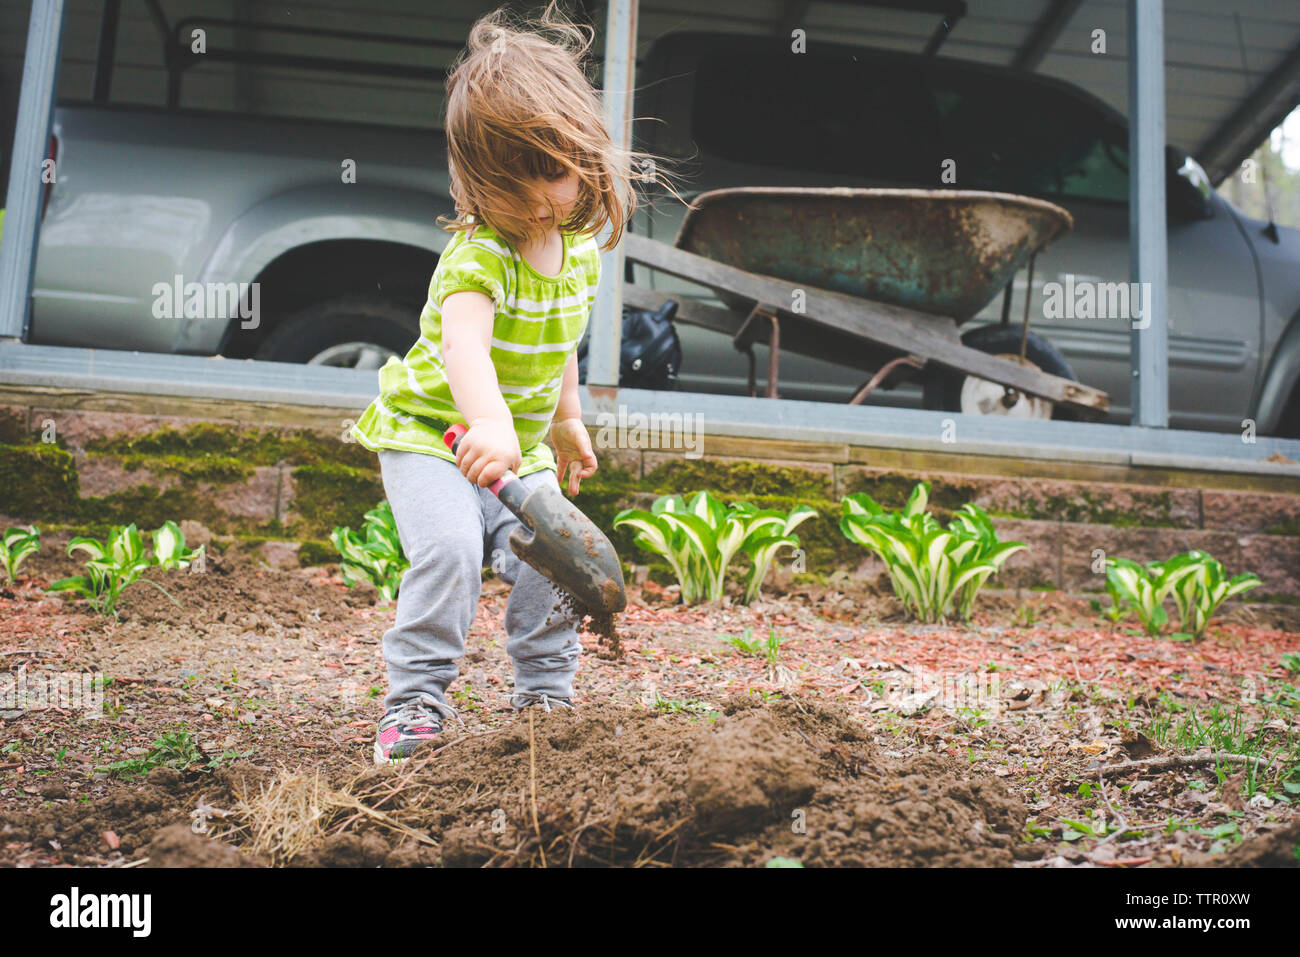 Girl digging soil with trowel while standing in garden Stock Photo